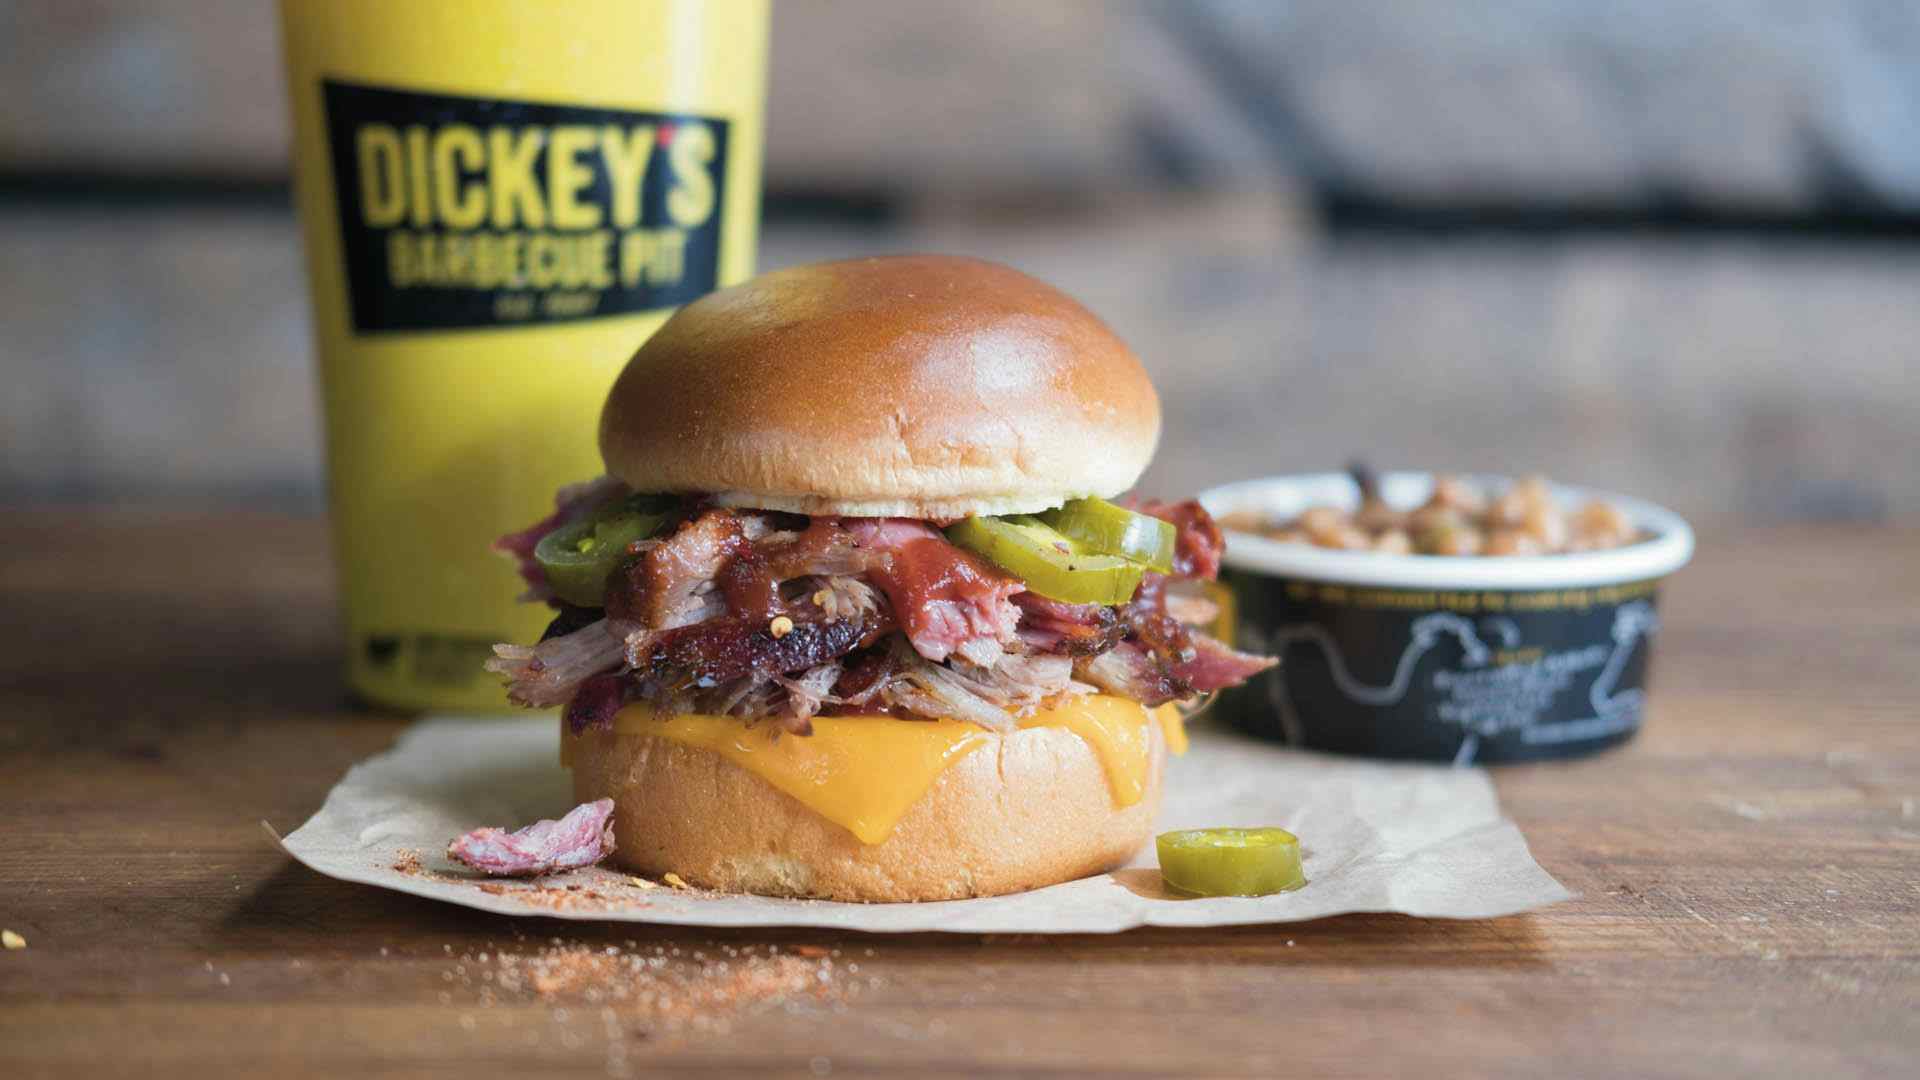 Dickey’s Slow Smoked Barbecue for Just One Dollar